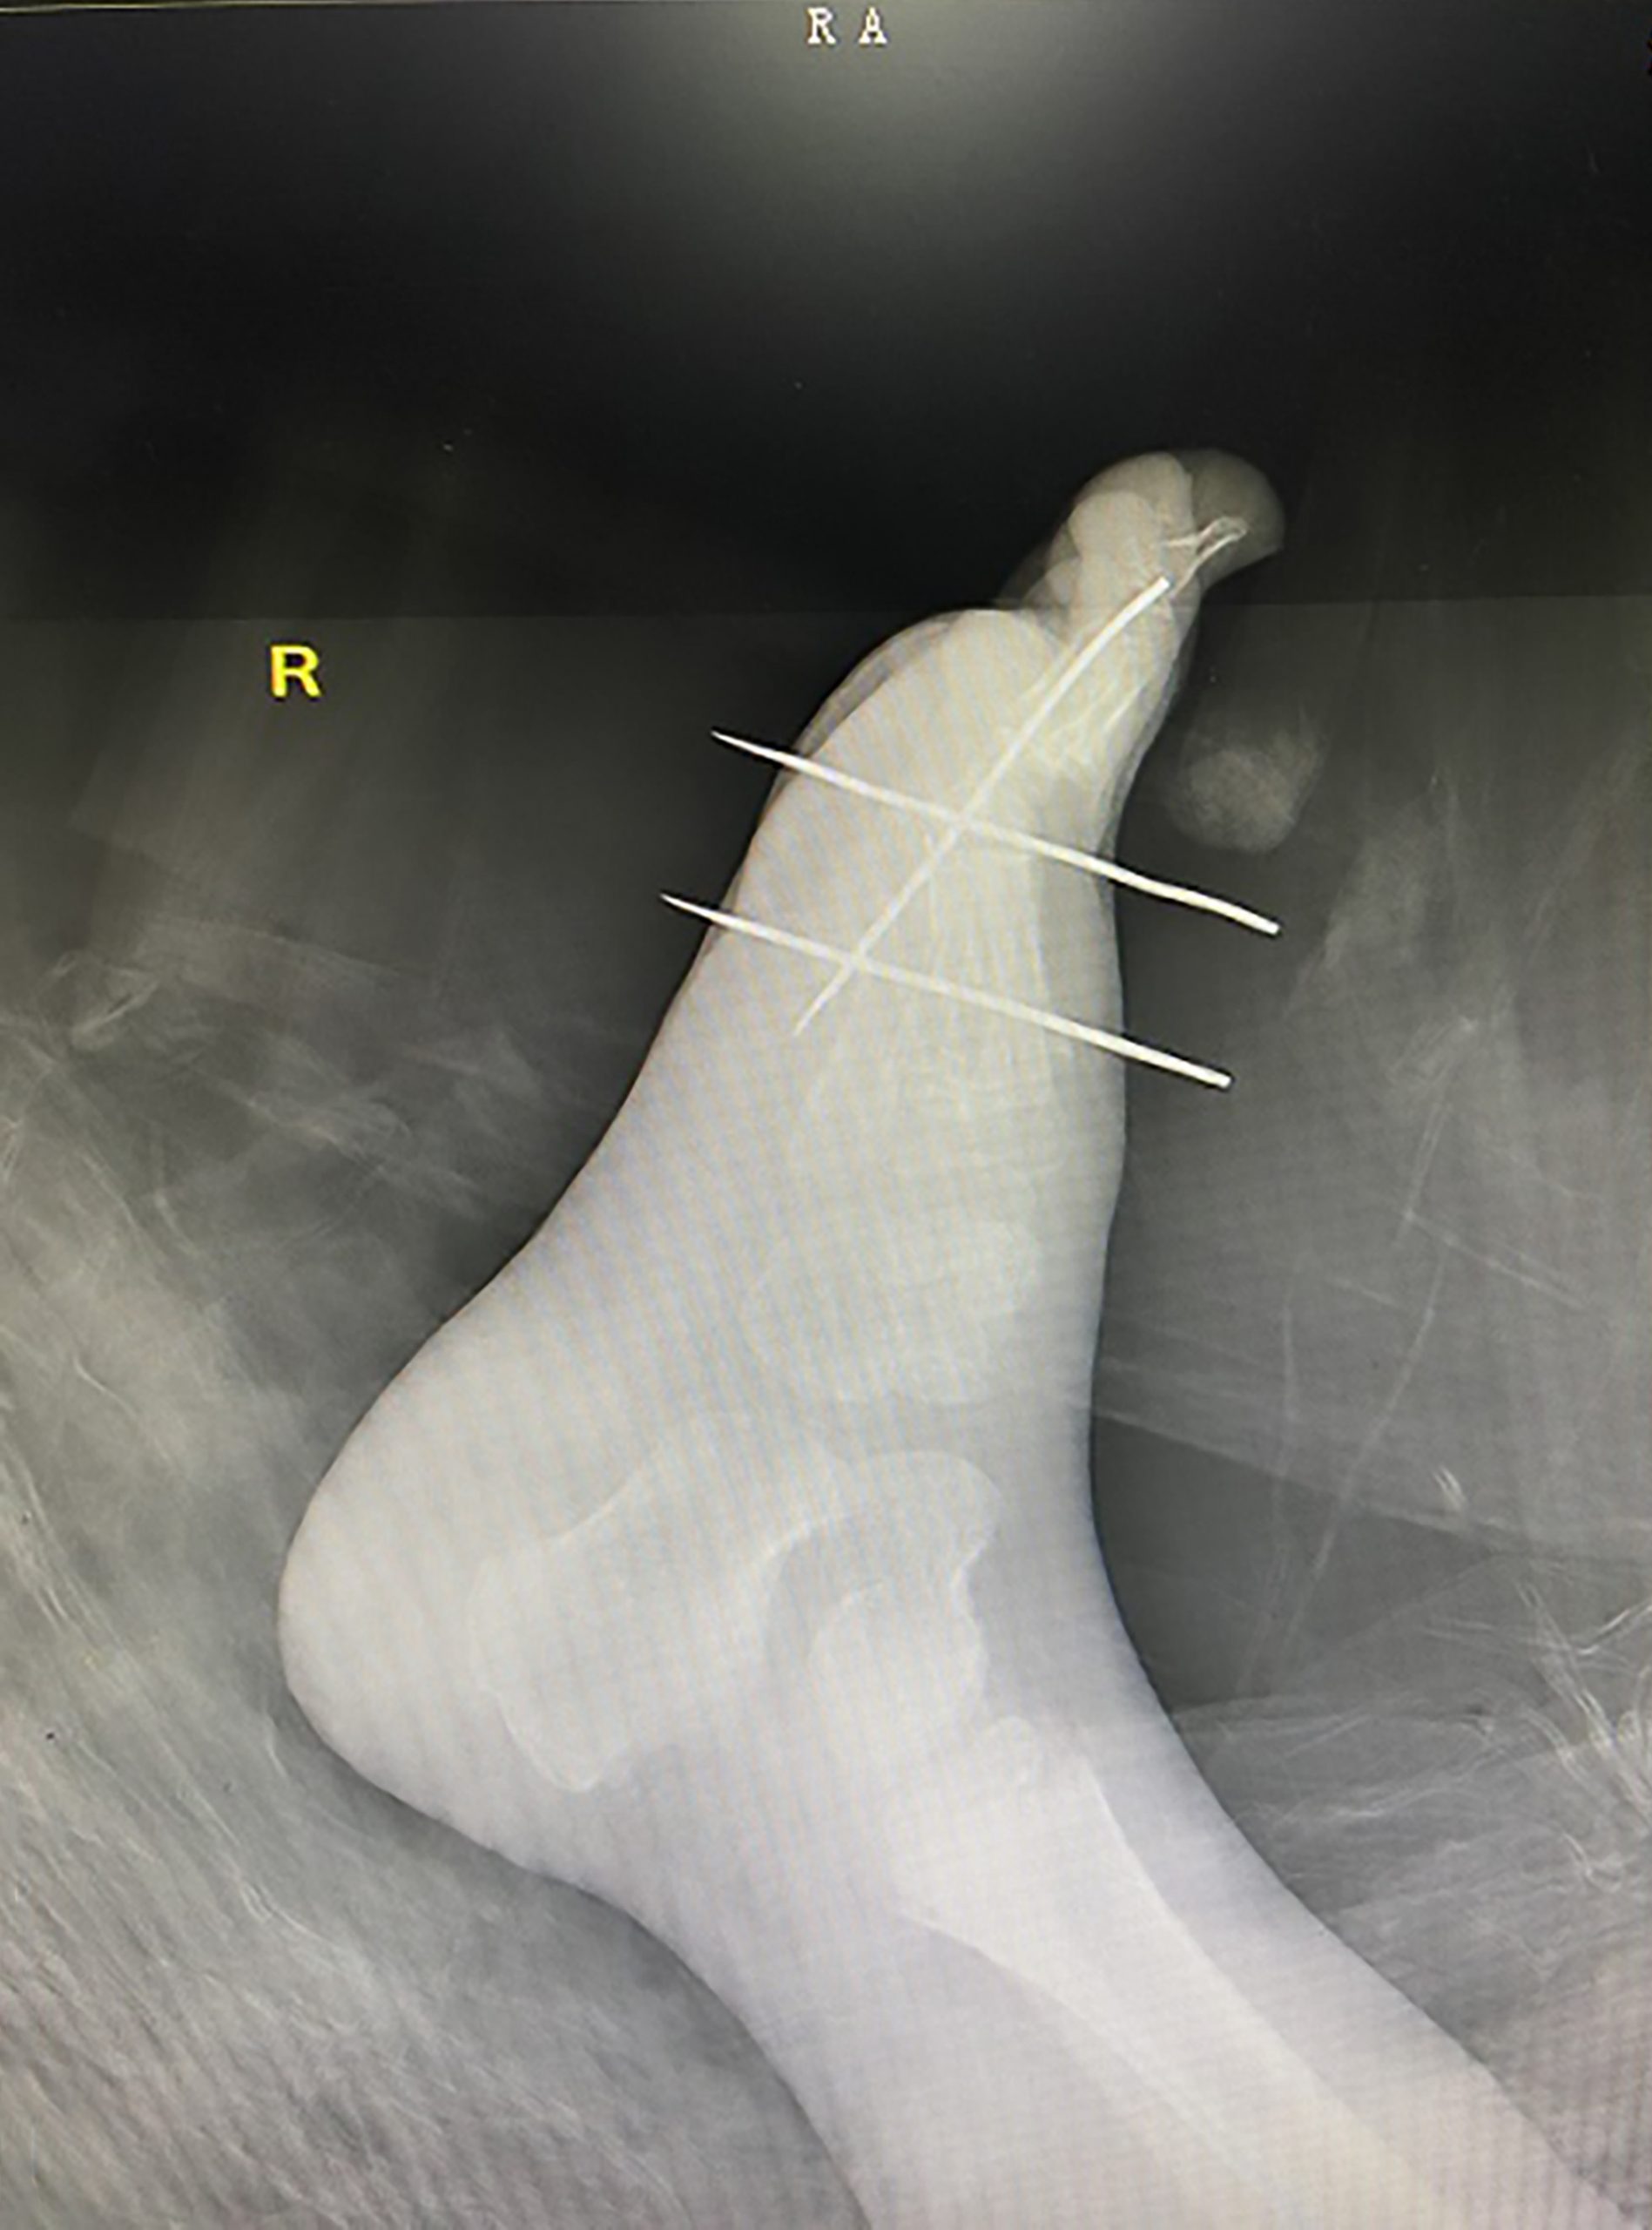 Read more about the article Drs Take 4 Hrs To Find Sewing Needle Stuck In Boys Foot